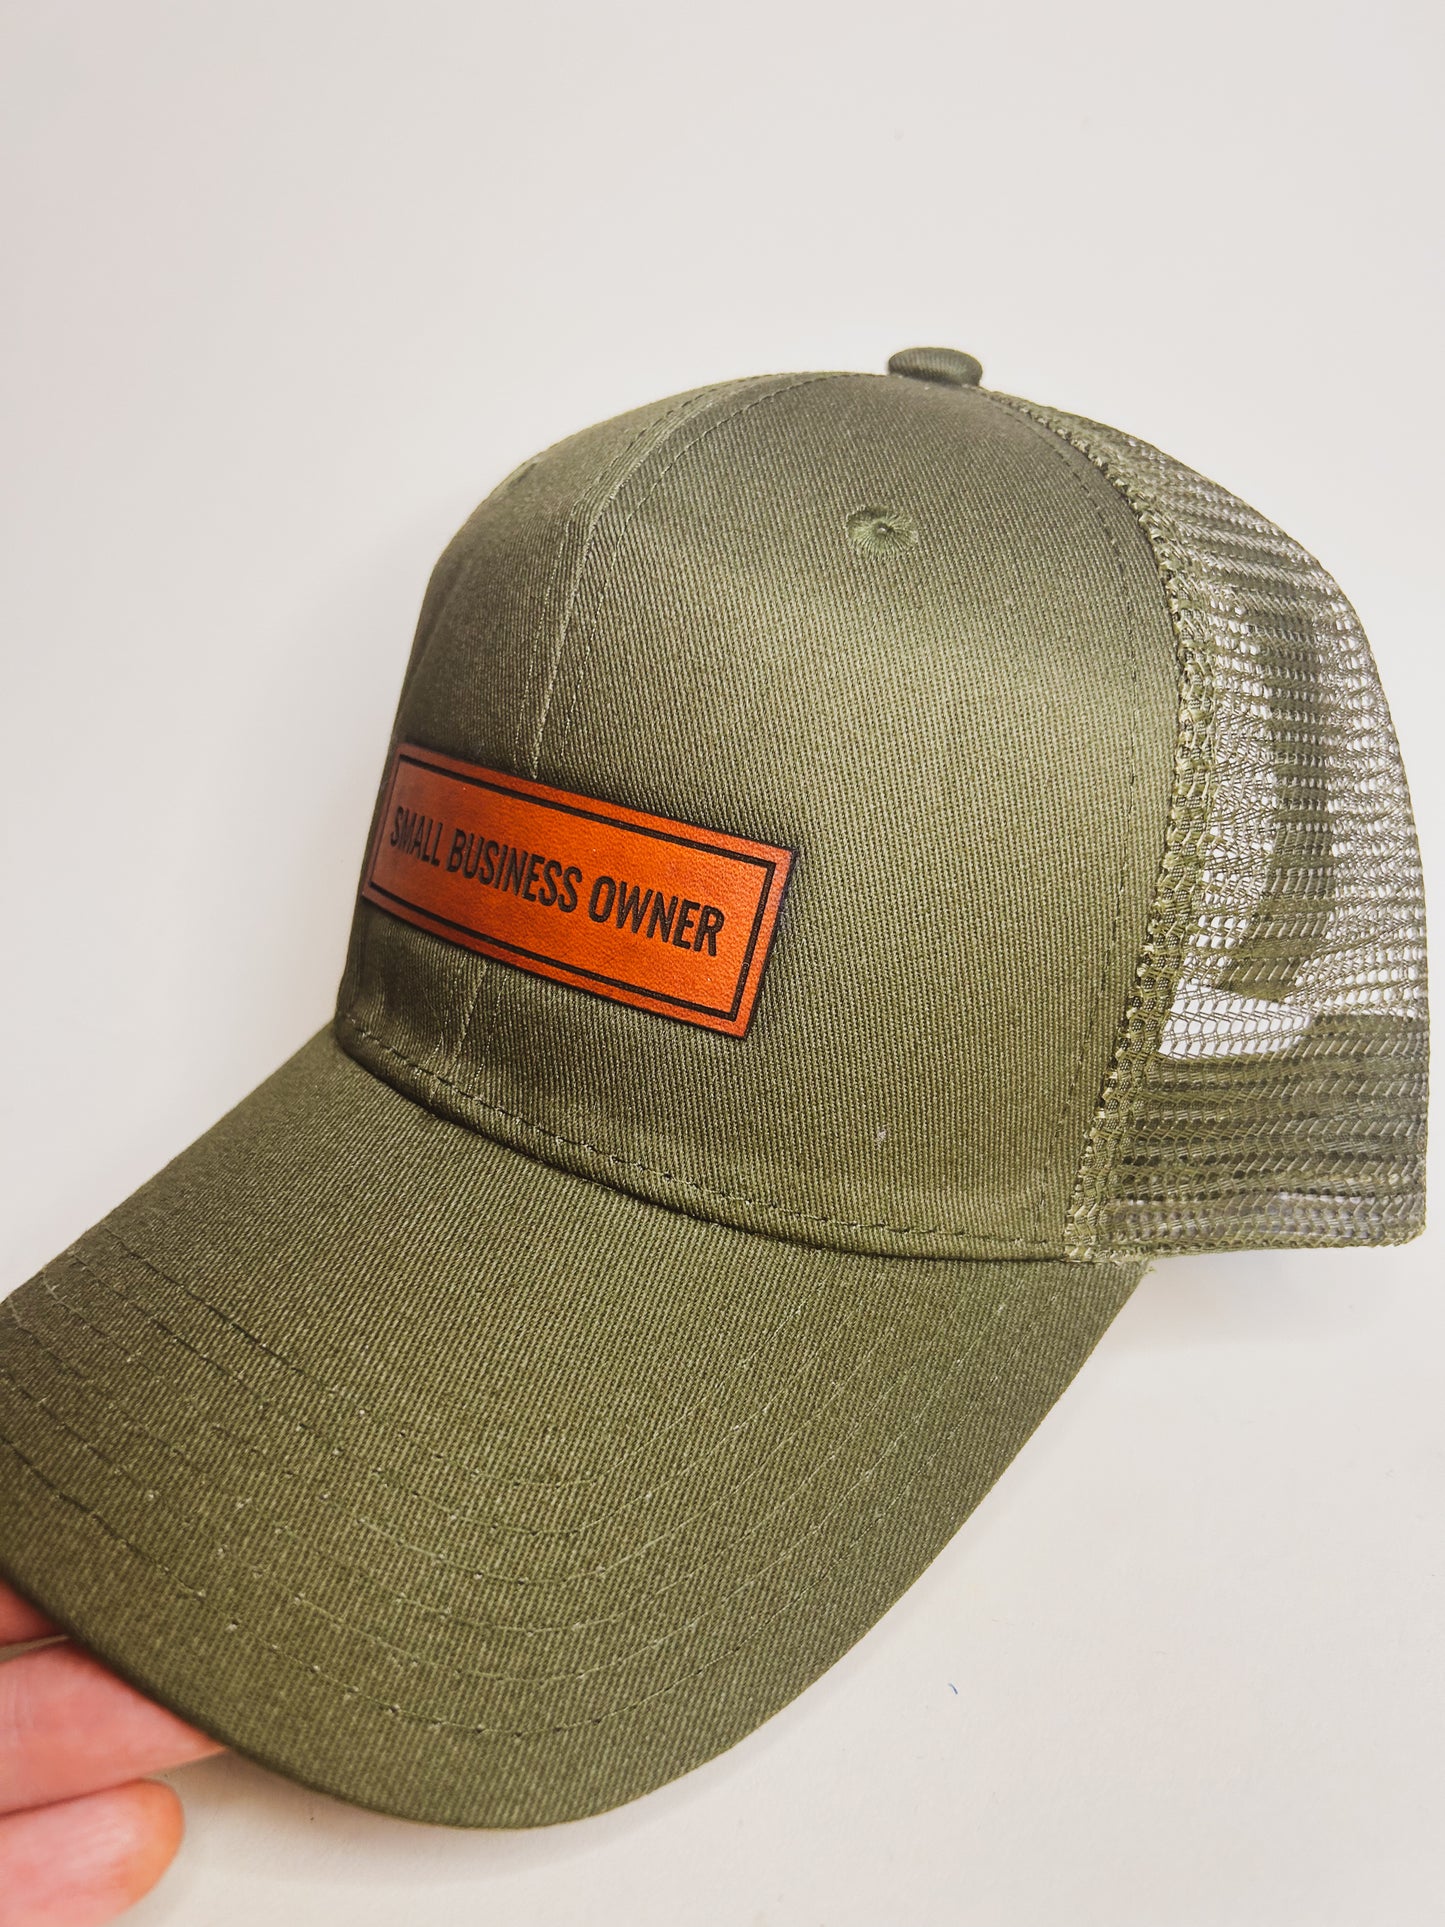 Small Business Owner Leather Patch Hat